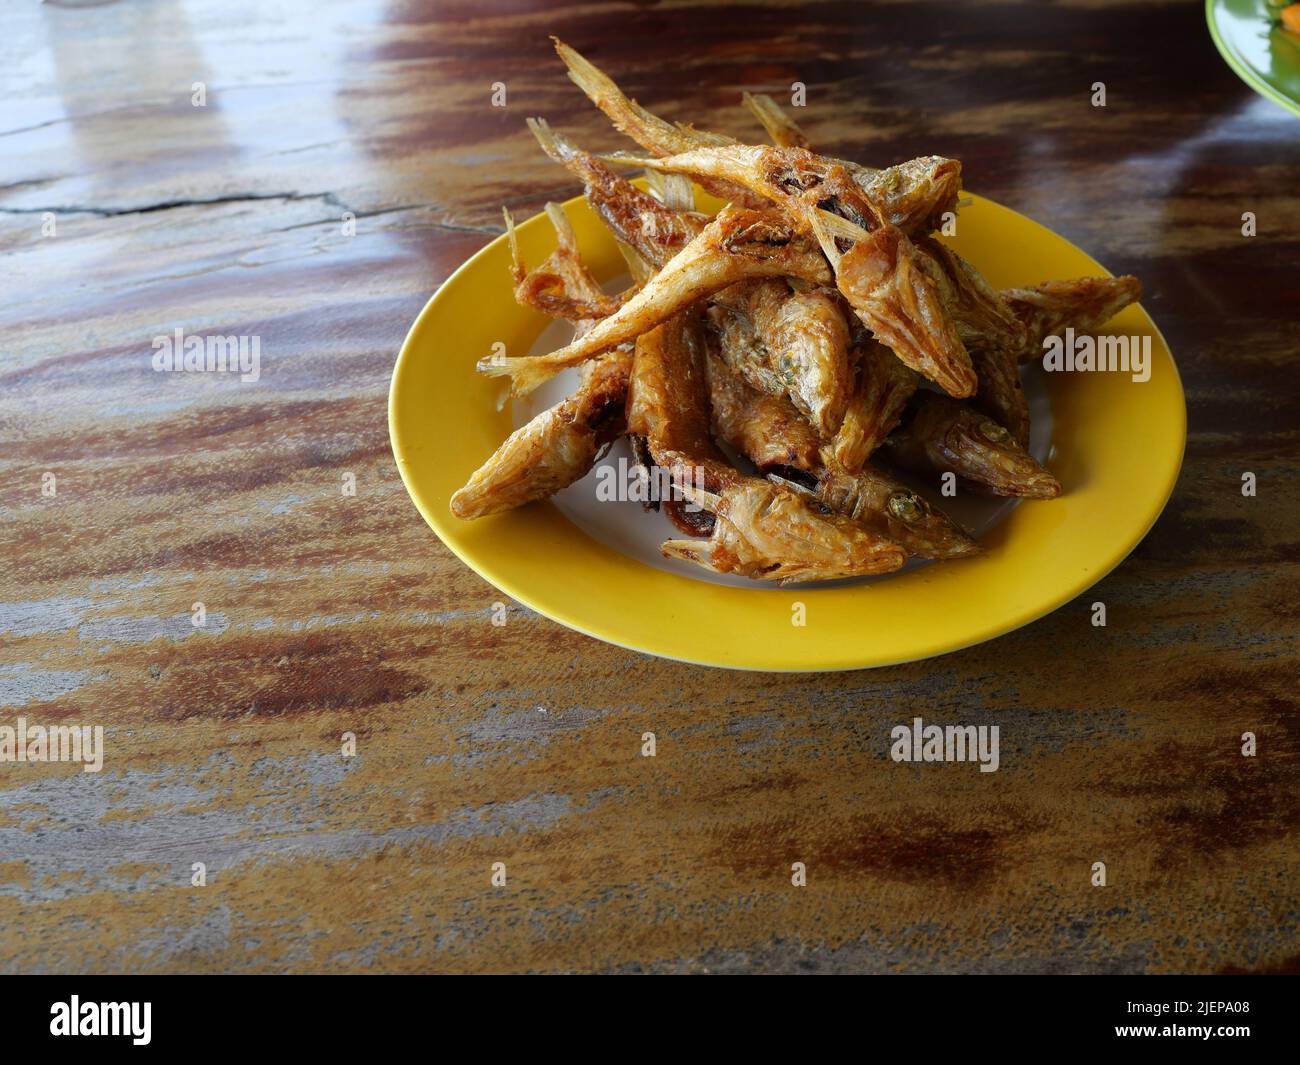 Northern whiting or Silver sillago fish deep fried in yellow dish on brown wooden table, Seafood in Thailand Stock Photo